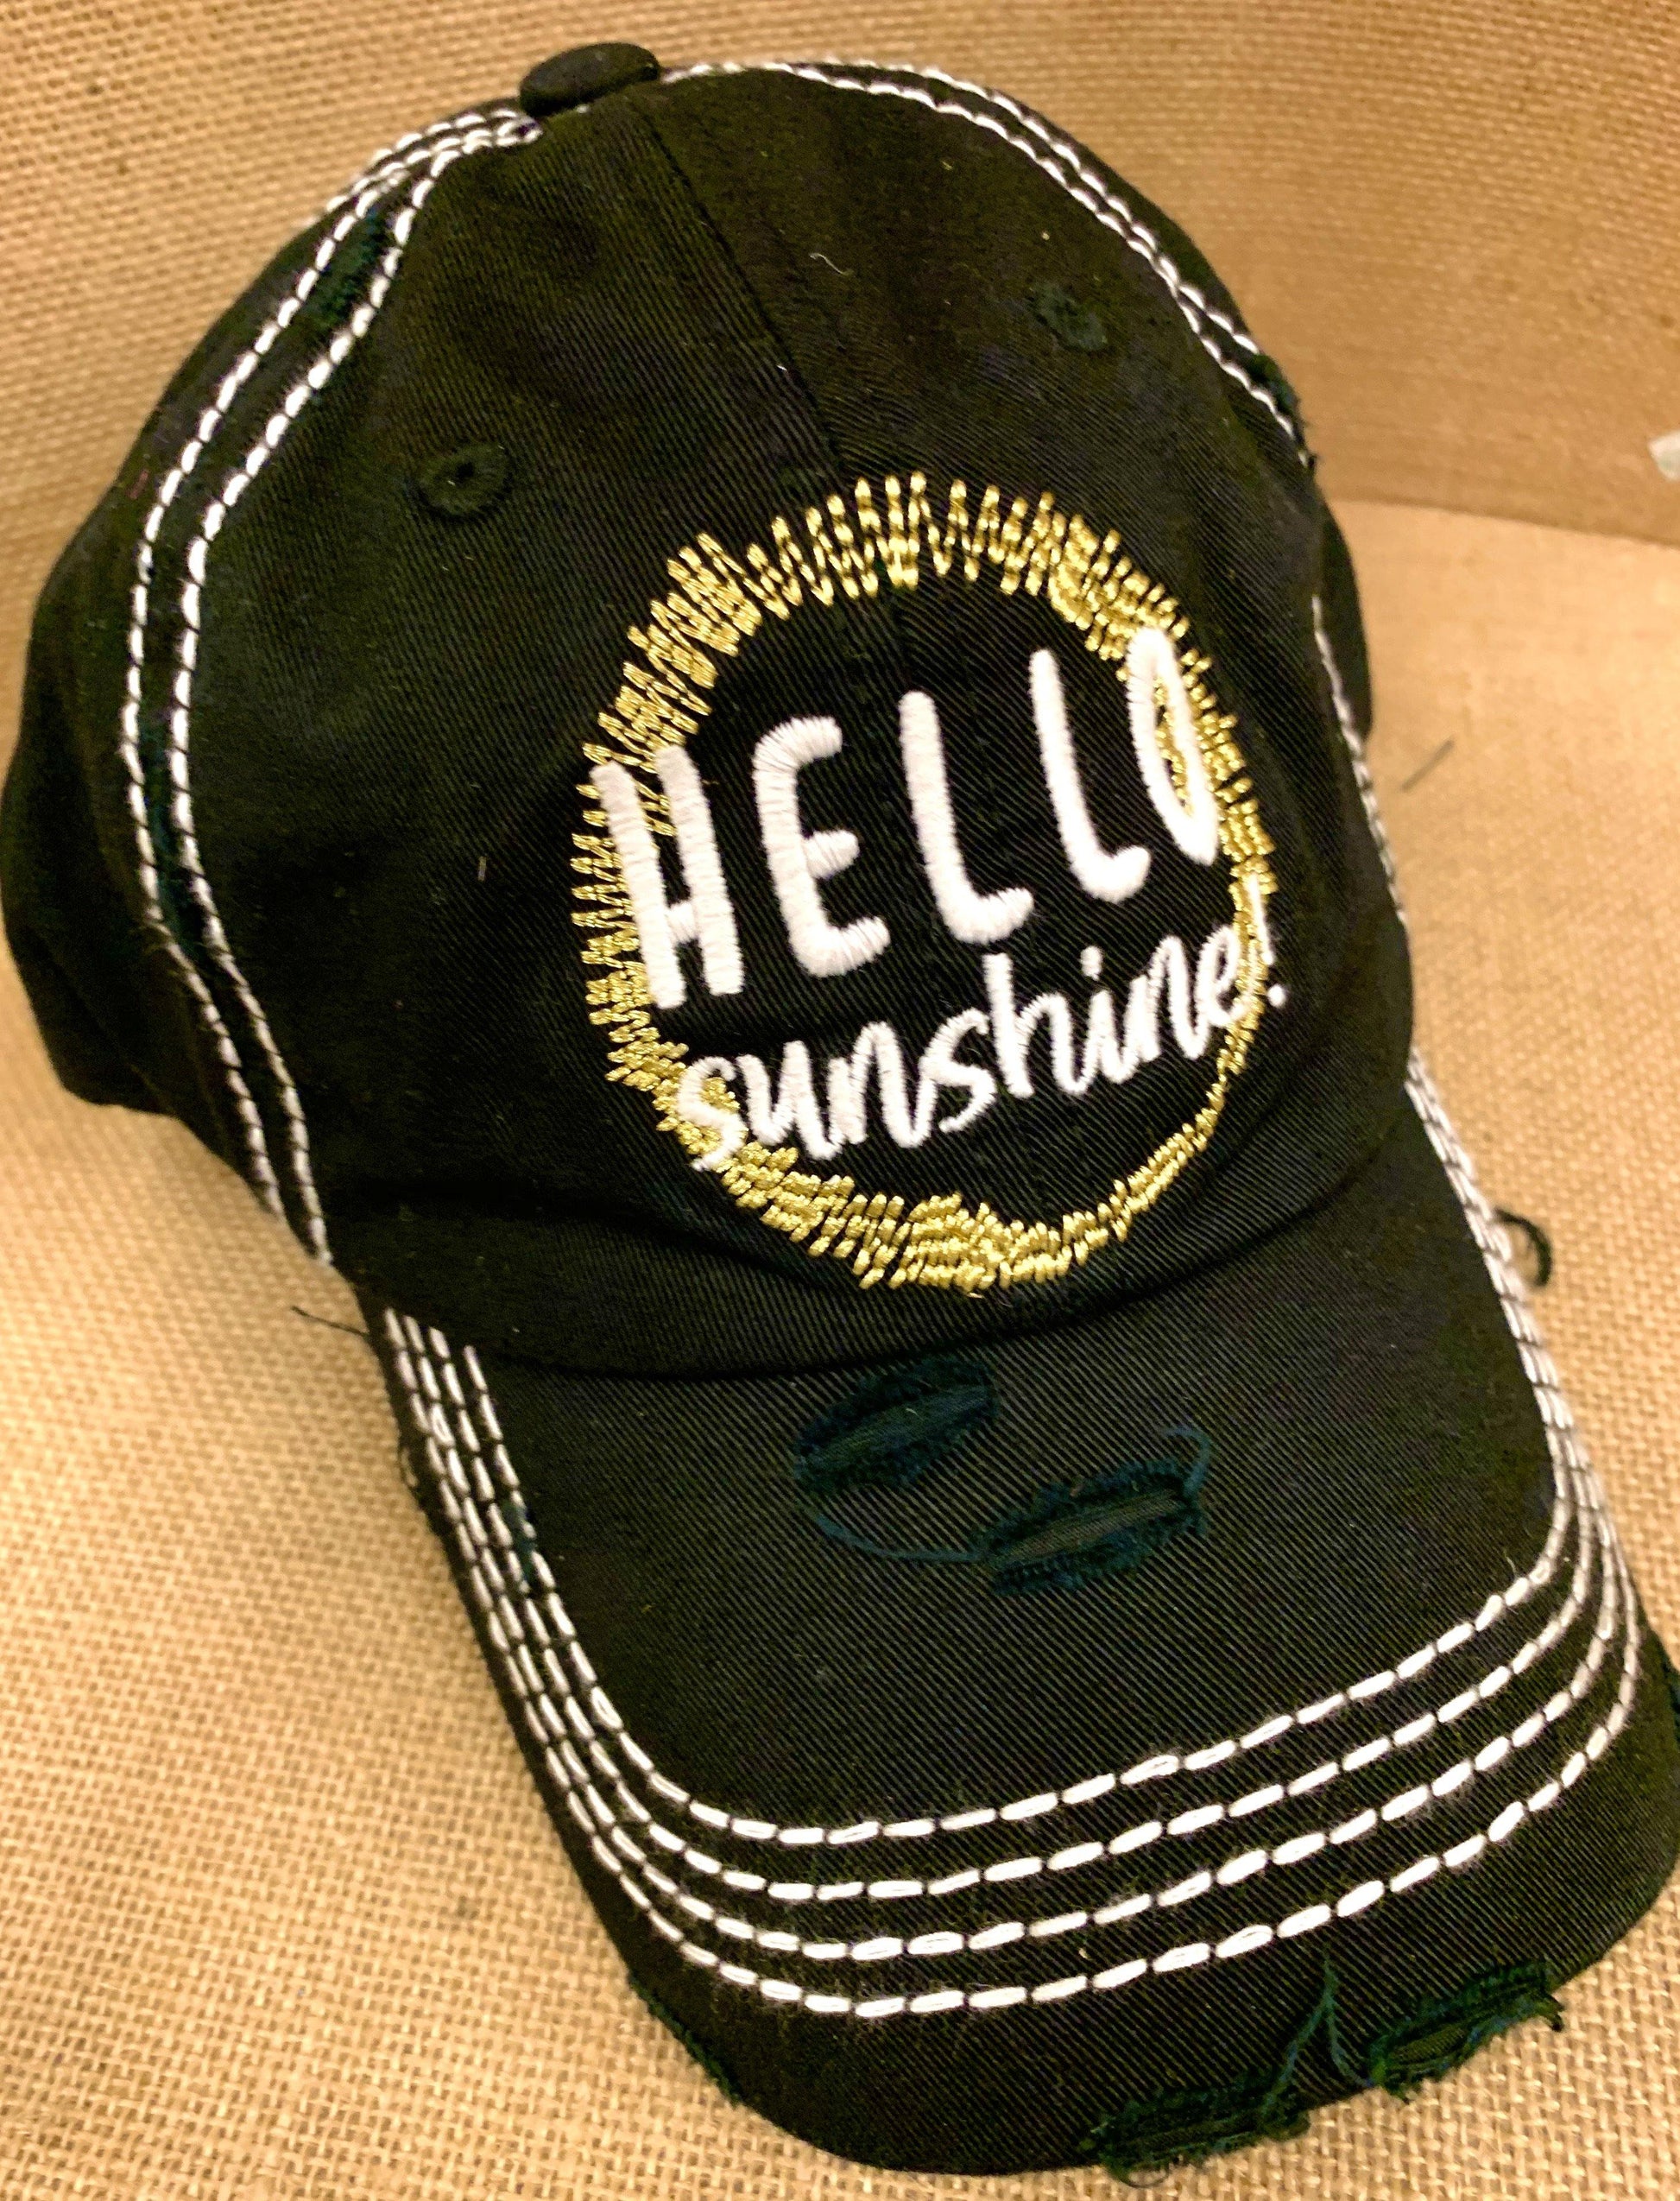 HELLO SUNSHINE hat Embroidered black distressed womens trucker cap - Stacy's Pink Martini Boutique